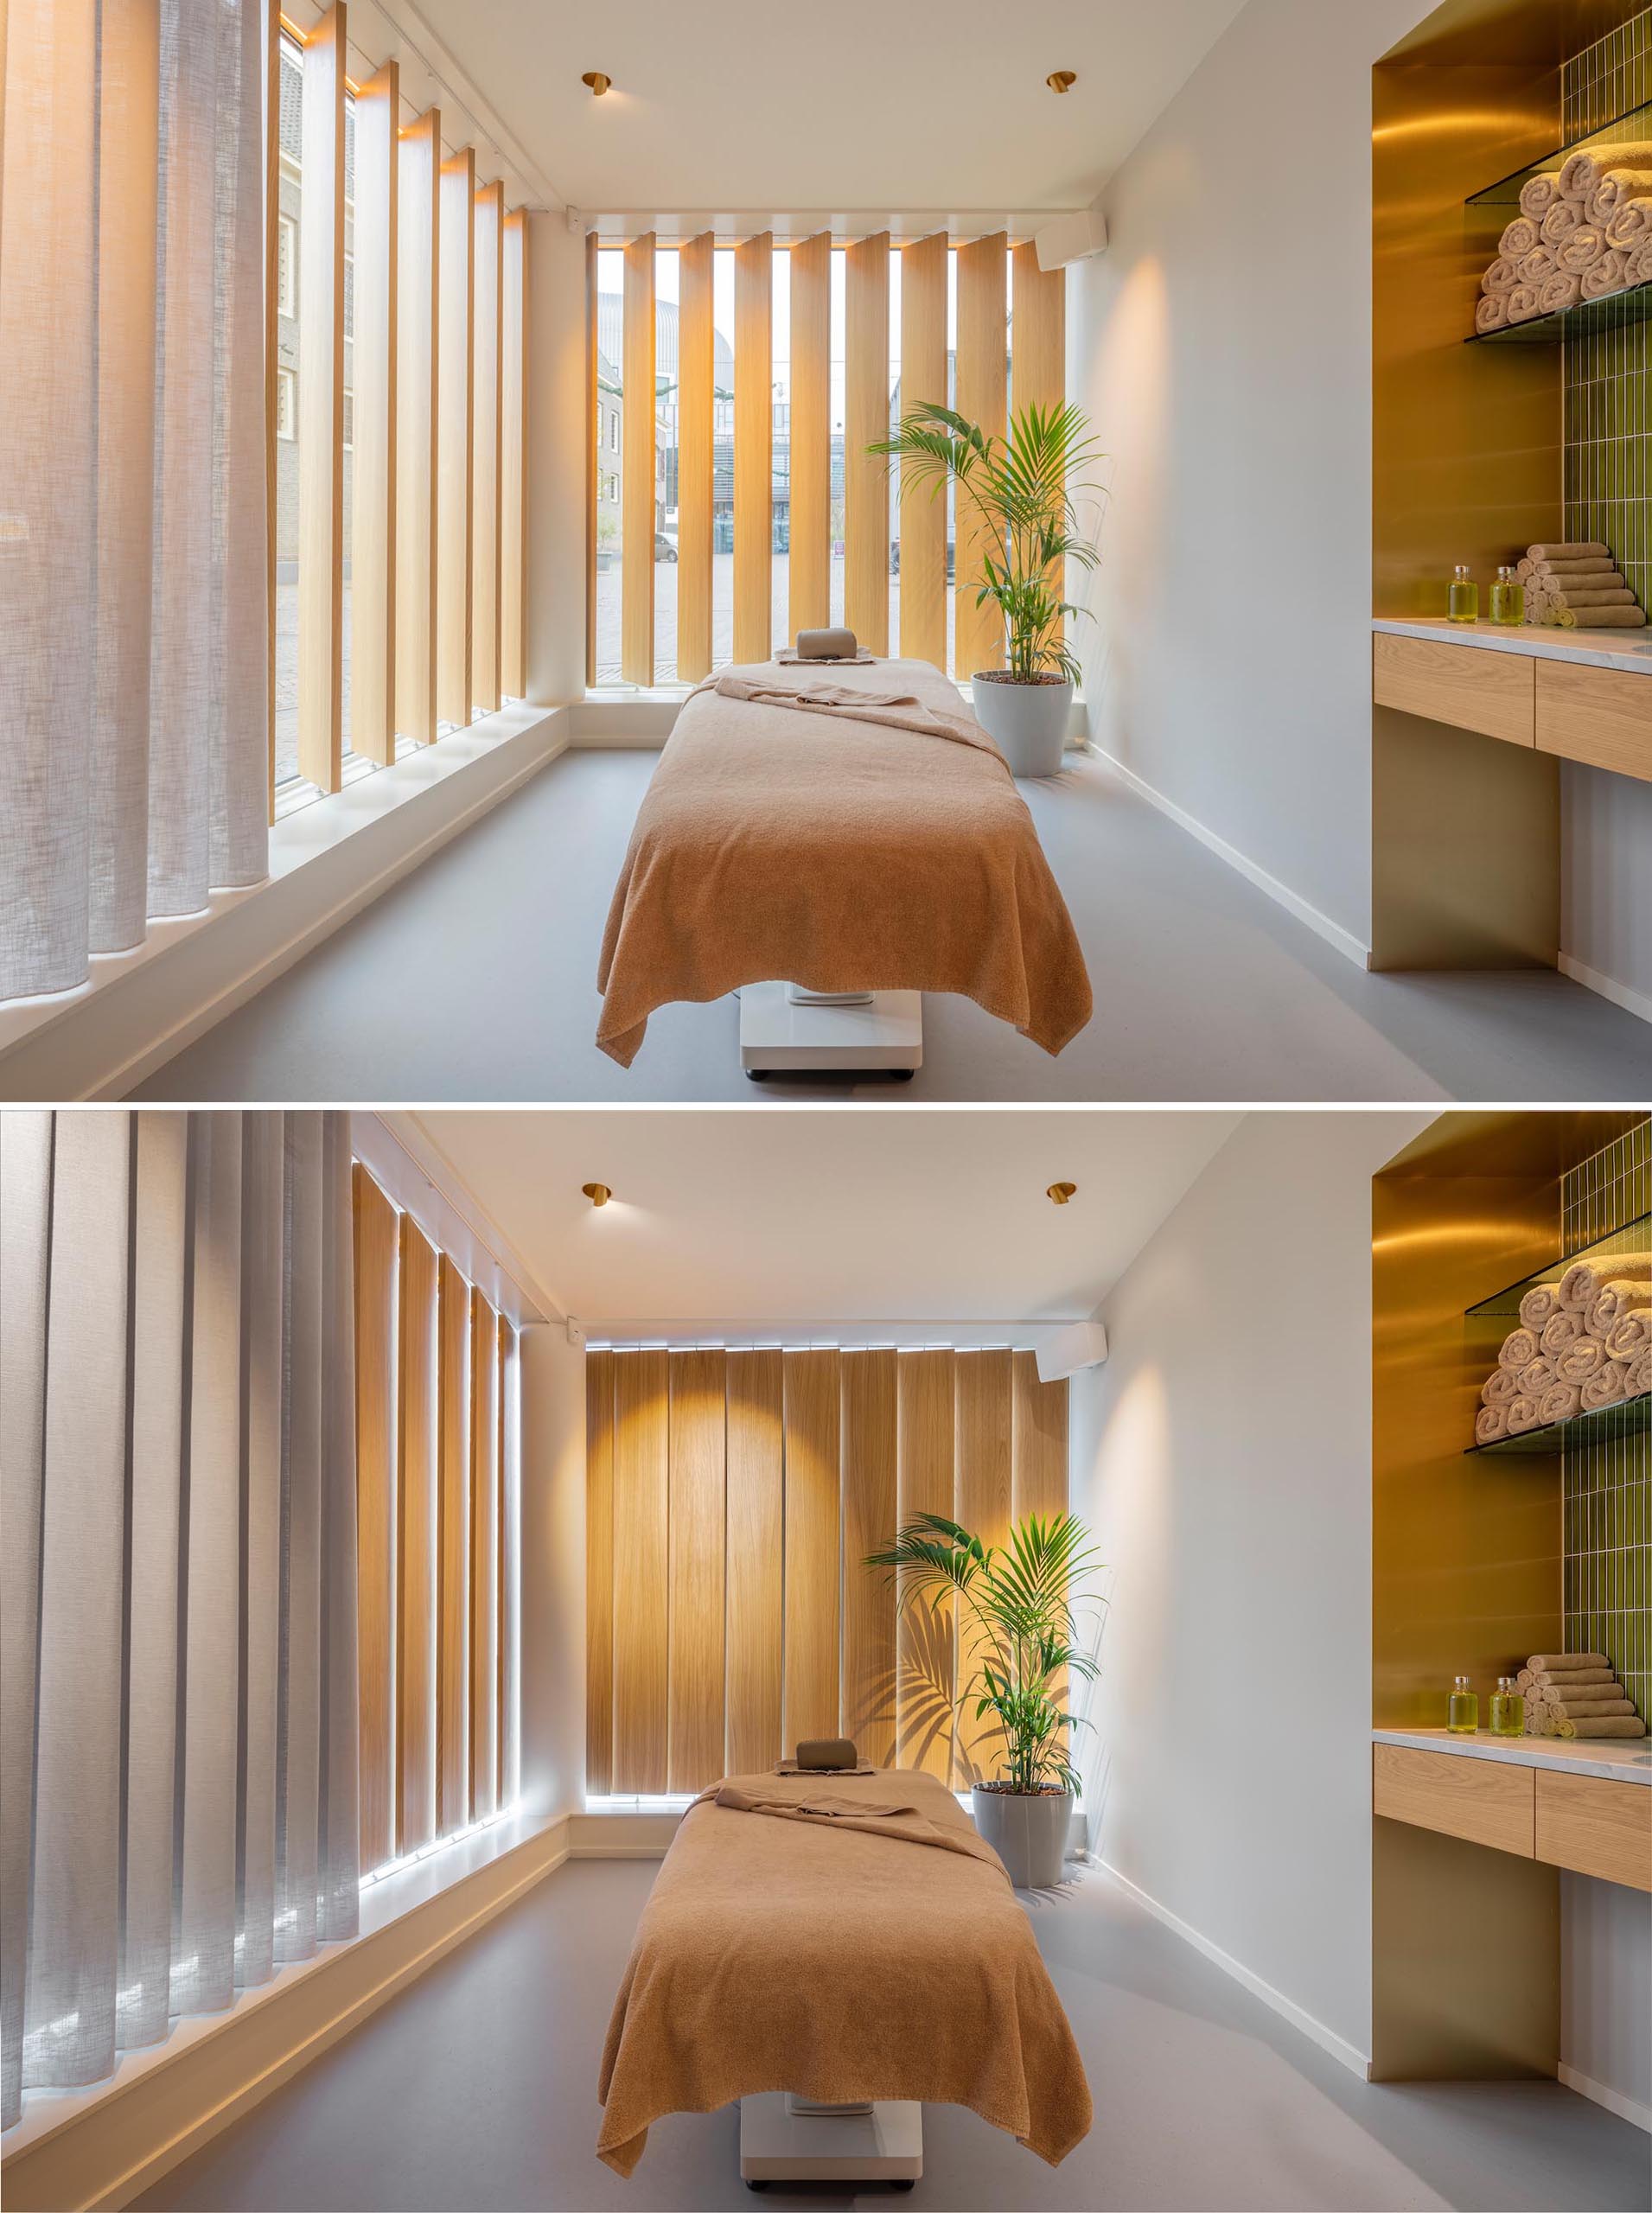 These private treatment rooms in a massage boutique feature floor-to-ceiling, pivoting oak lamellas that gently block the views from passers-by when they are closed. 